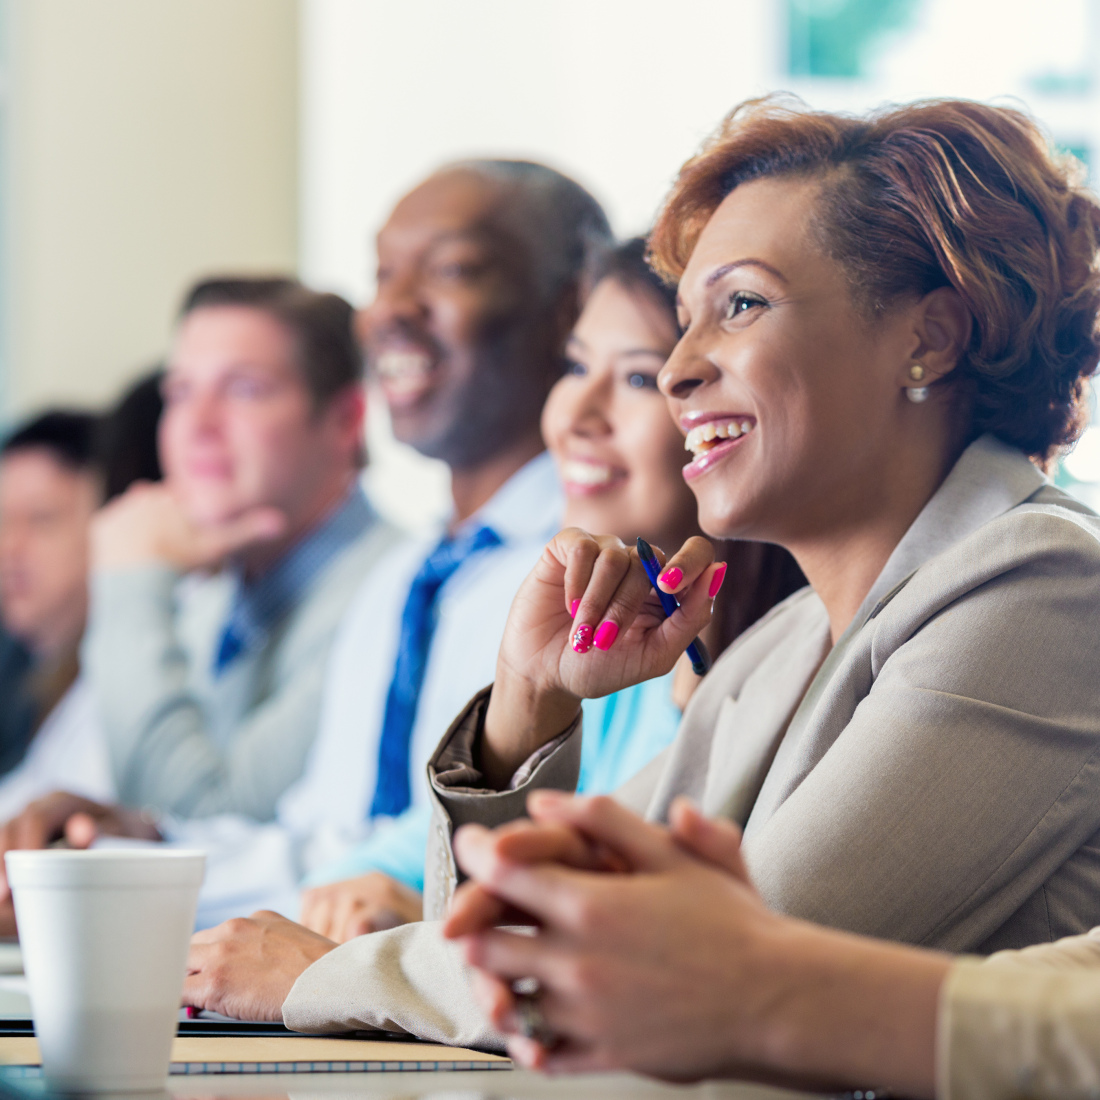 A black woman is smiling while attending professional development. She is dressed in smart business casual clothing and is sitting next to a diverse group of professional coworkers.